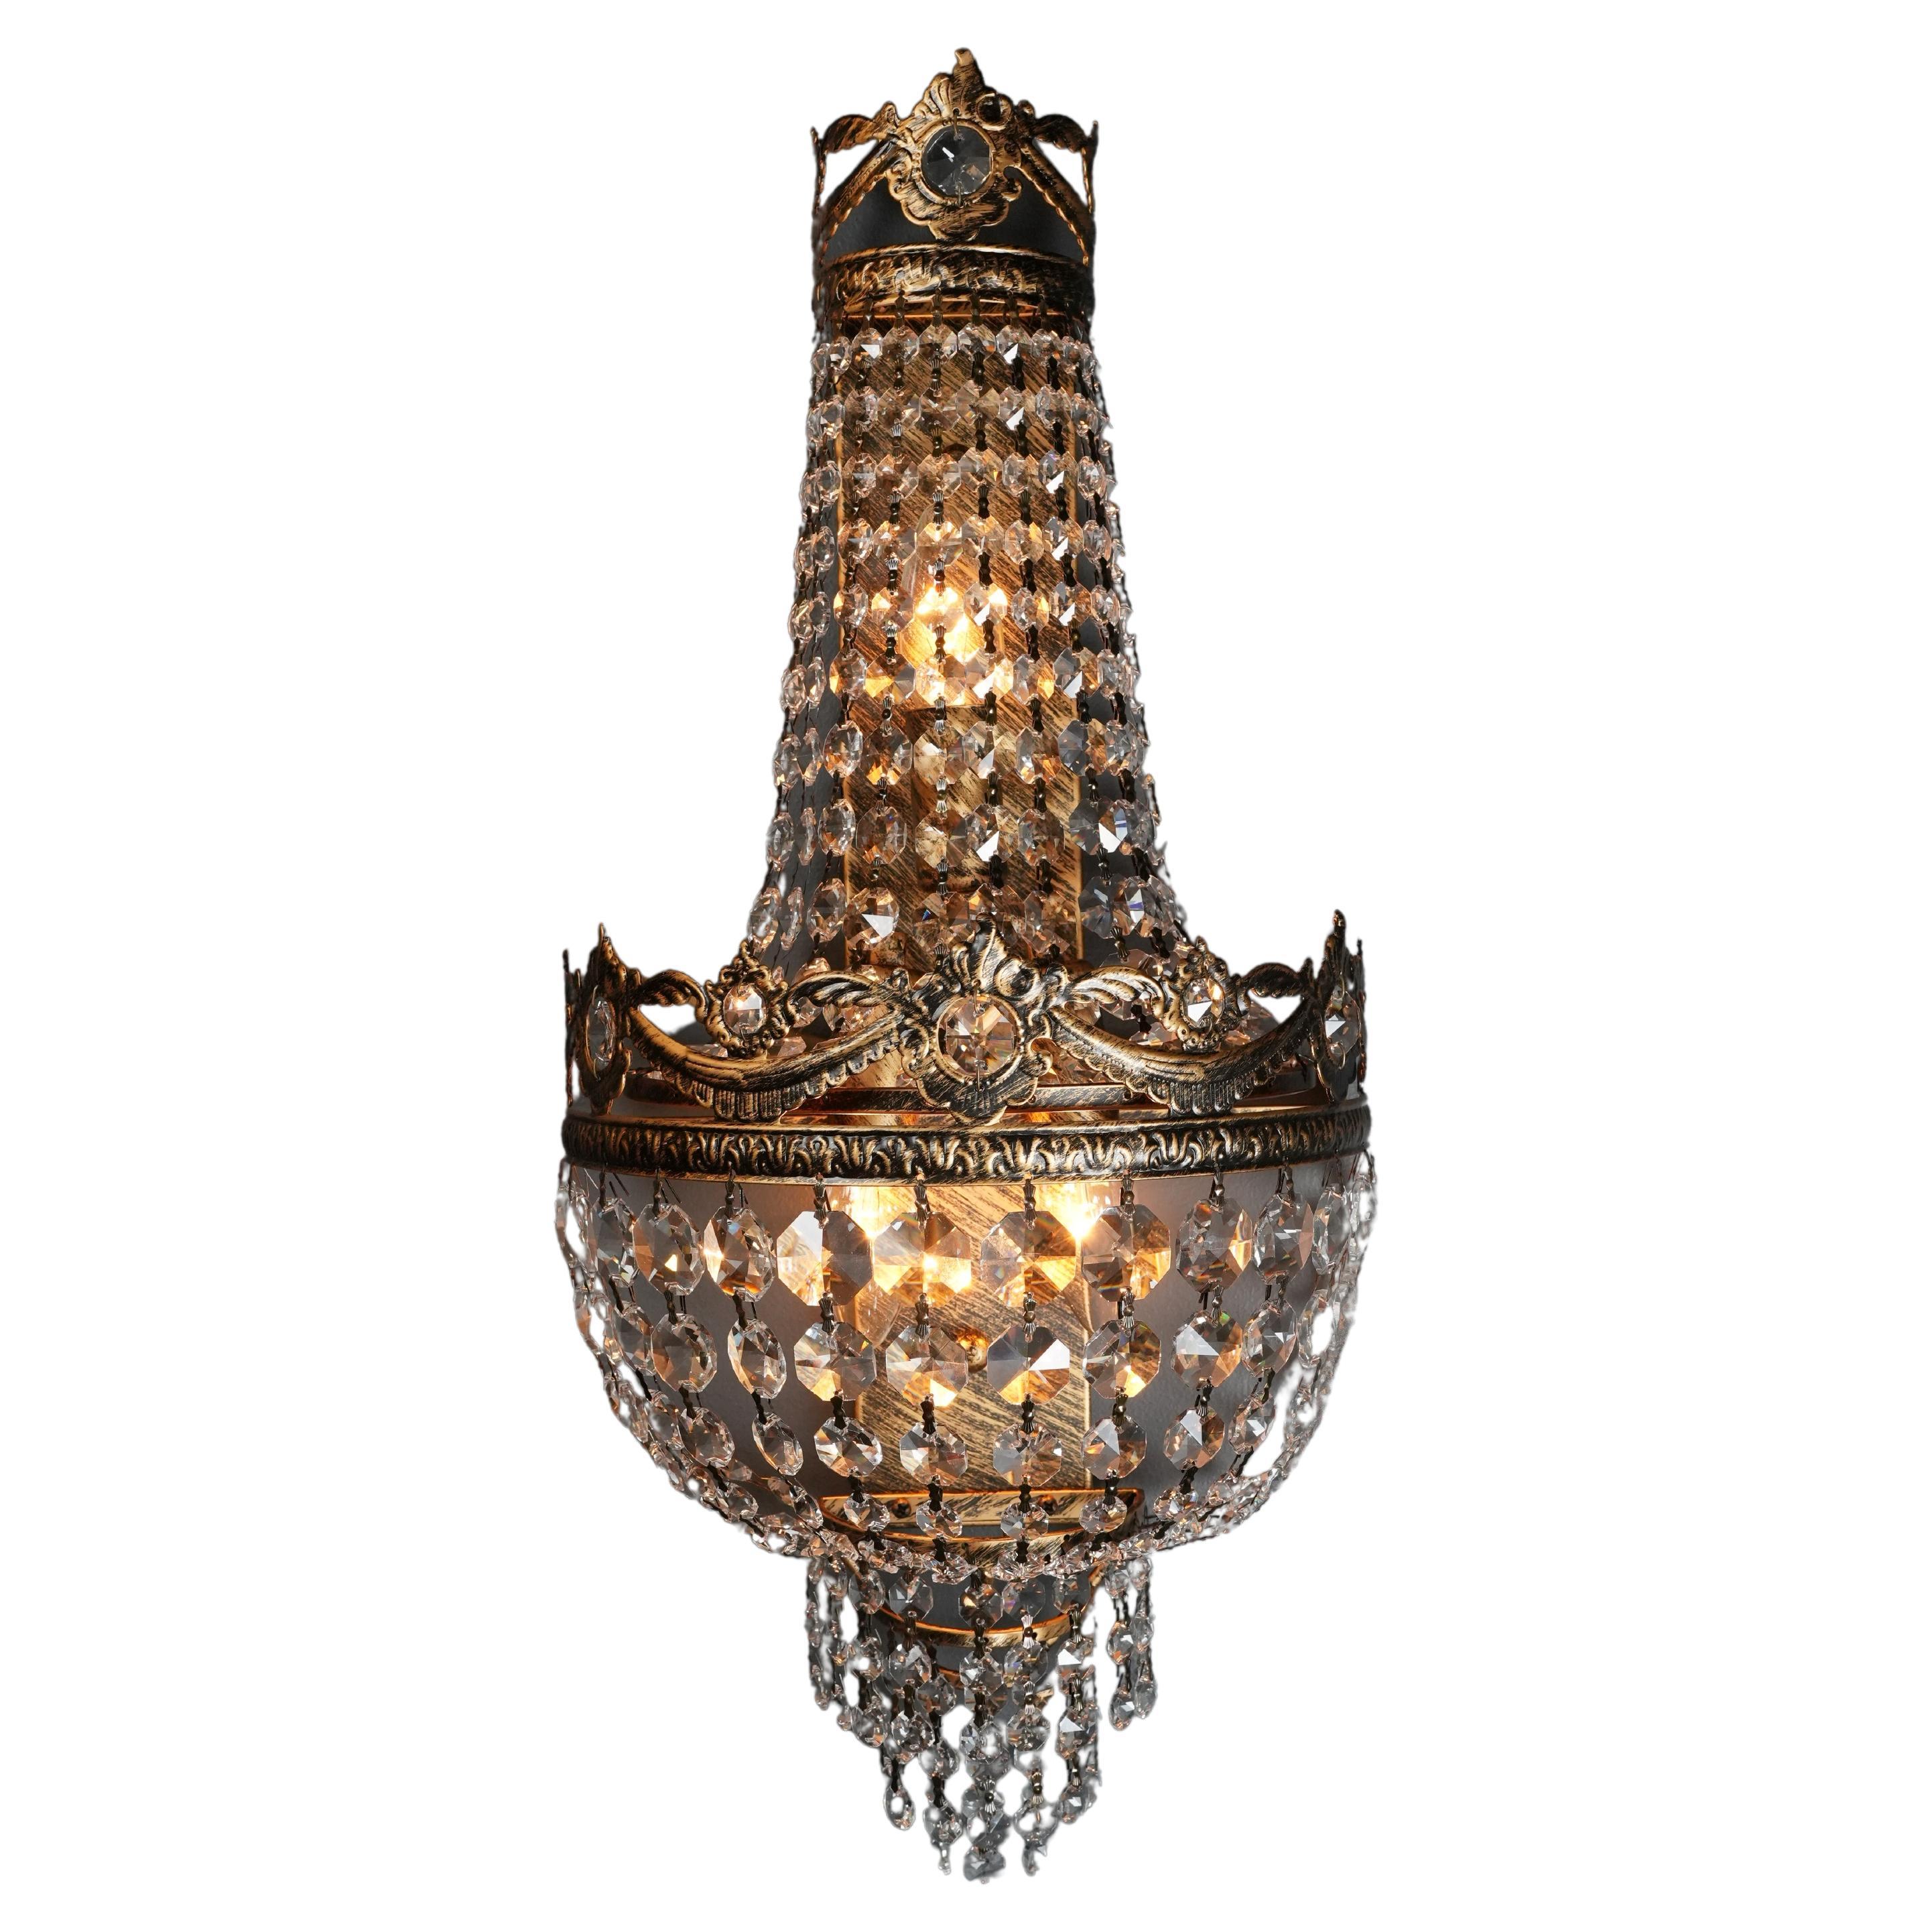 Antique Style Wall Lamp Art Deco Art Nouveau Classic Decoration With Crystals